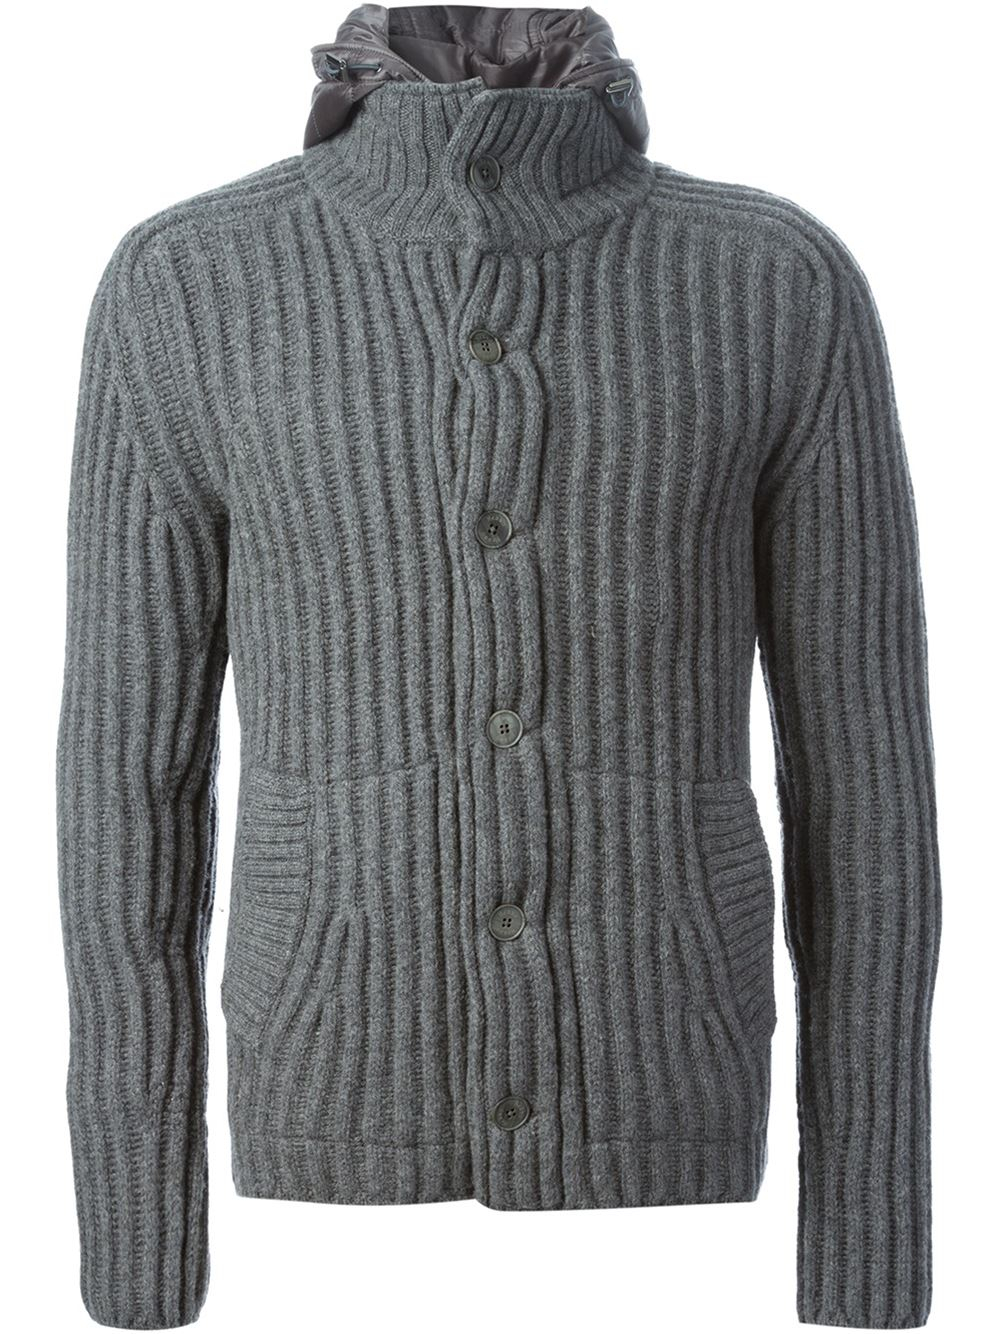 Herno Ribbed Cardigan in Grey (Grey) for Men - Lyst